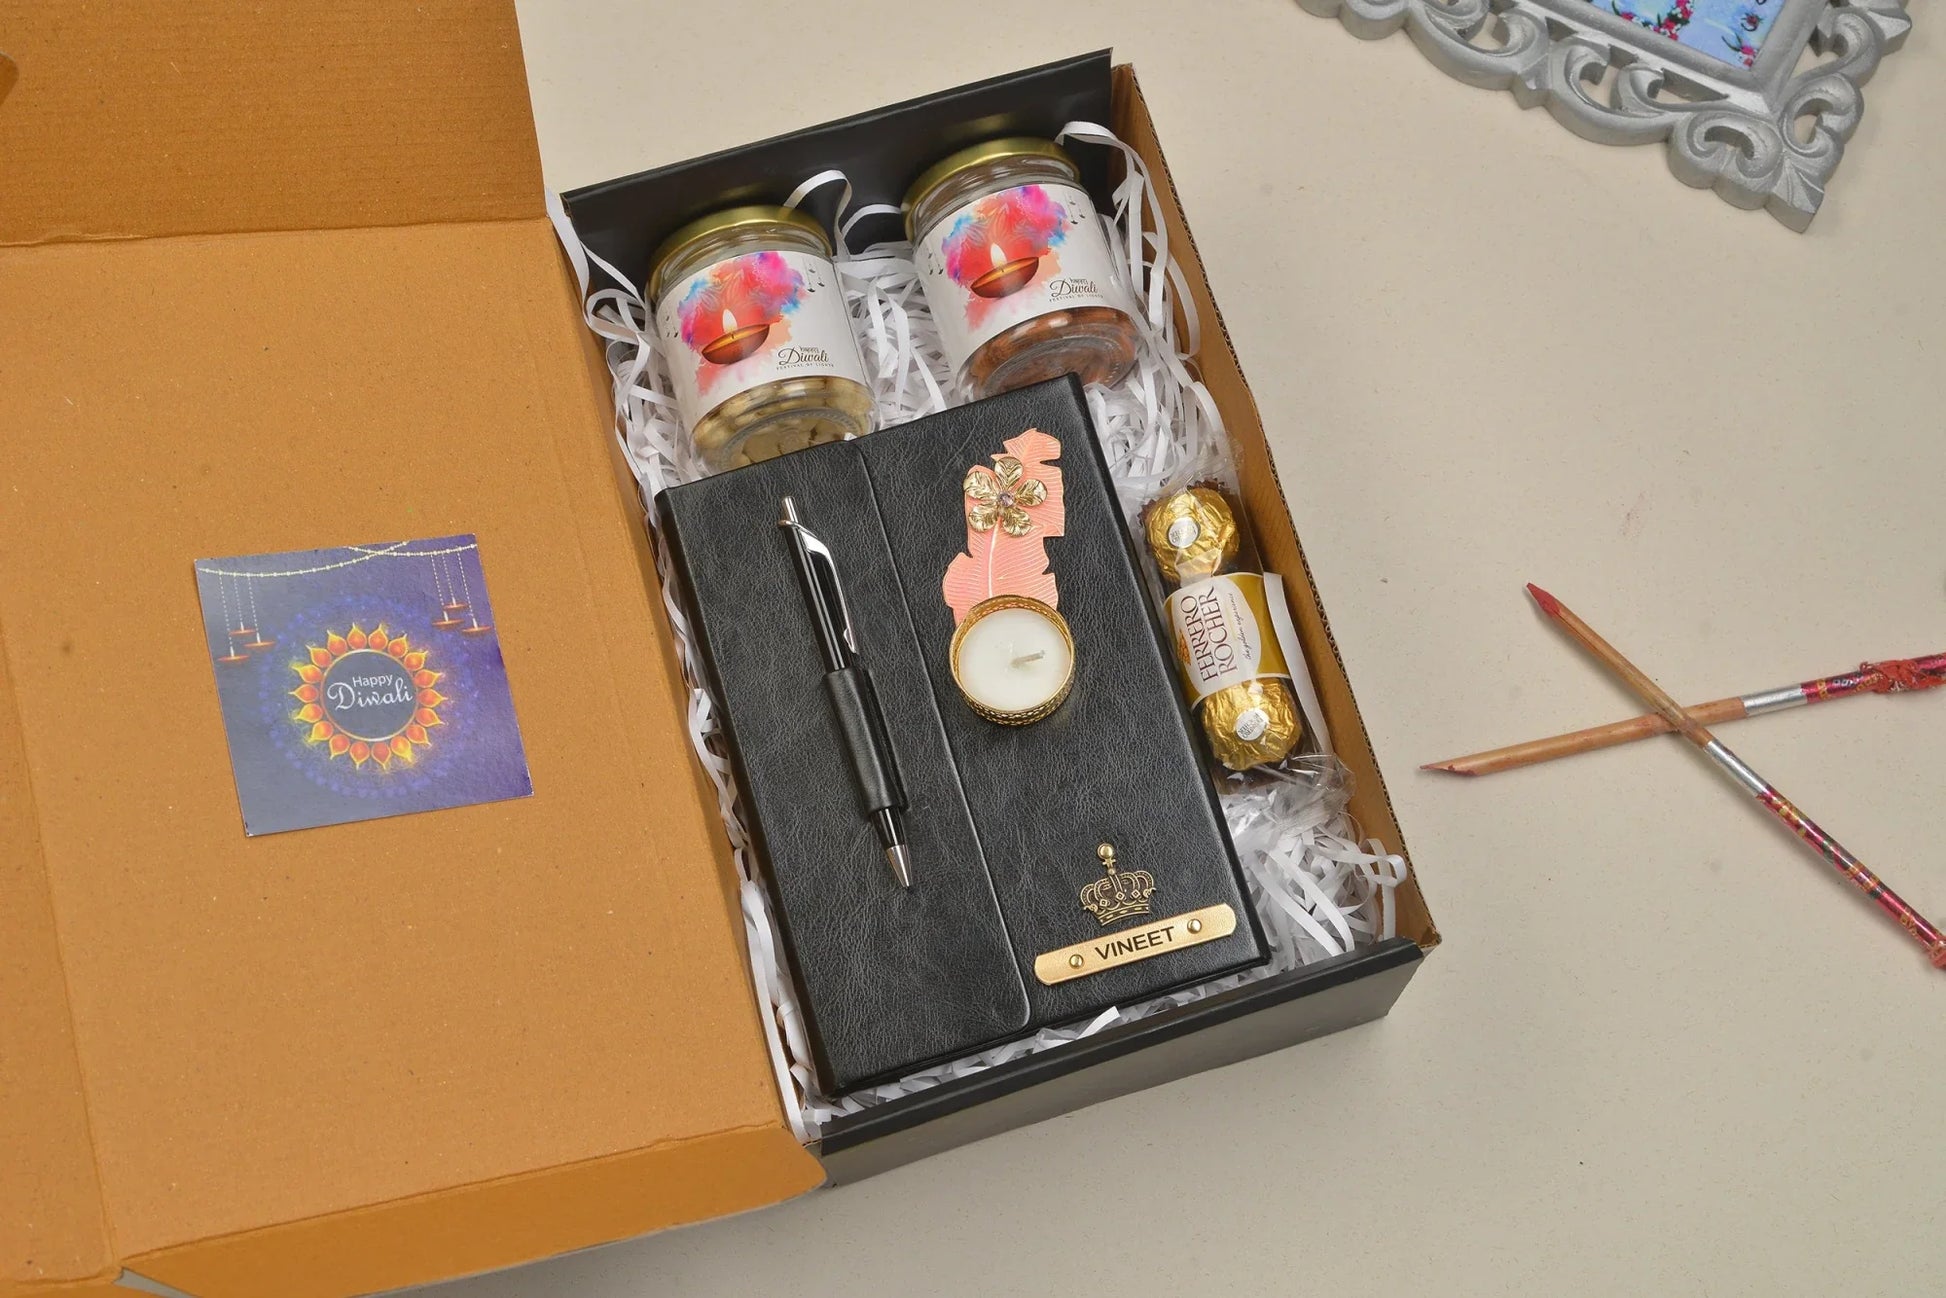 Celebrate the festive season with our Diwali Combo! This set features a stylish diary, a useful keychain, a beautiful diya, delicious chocolates, a sleek pen, and a handy dry fruit jar. The perfect gift for friends and family!